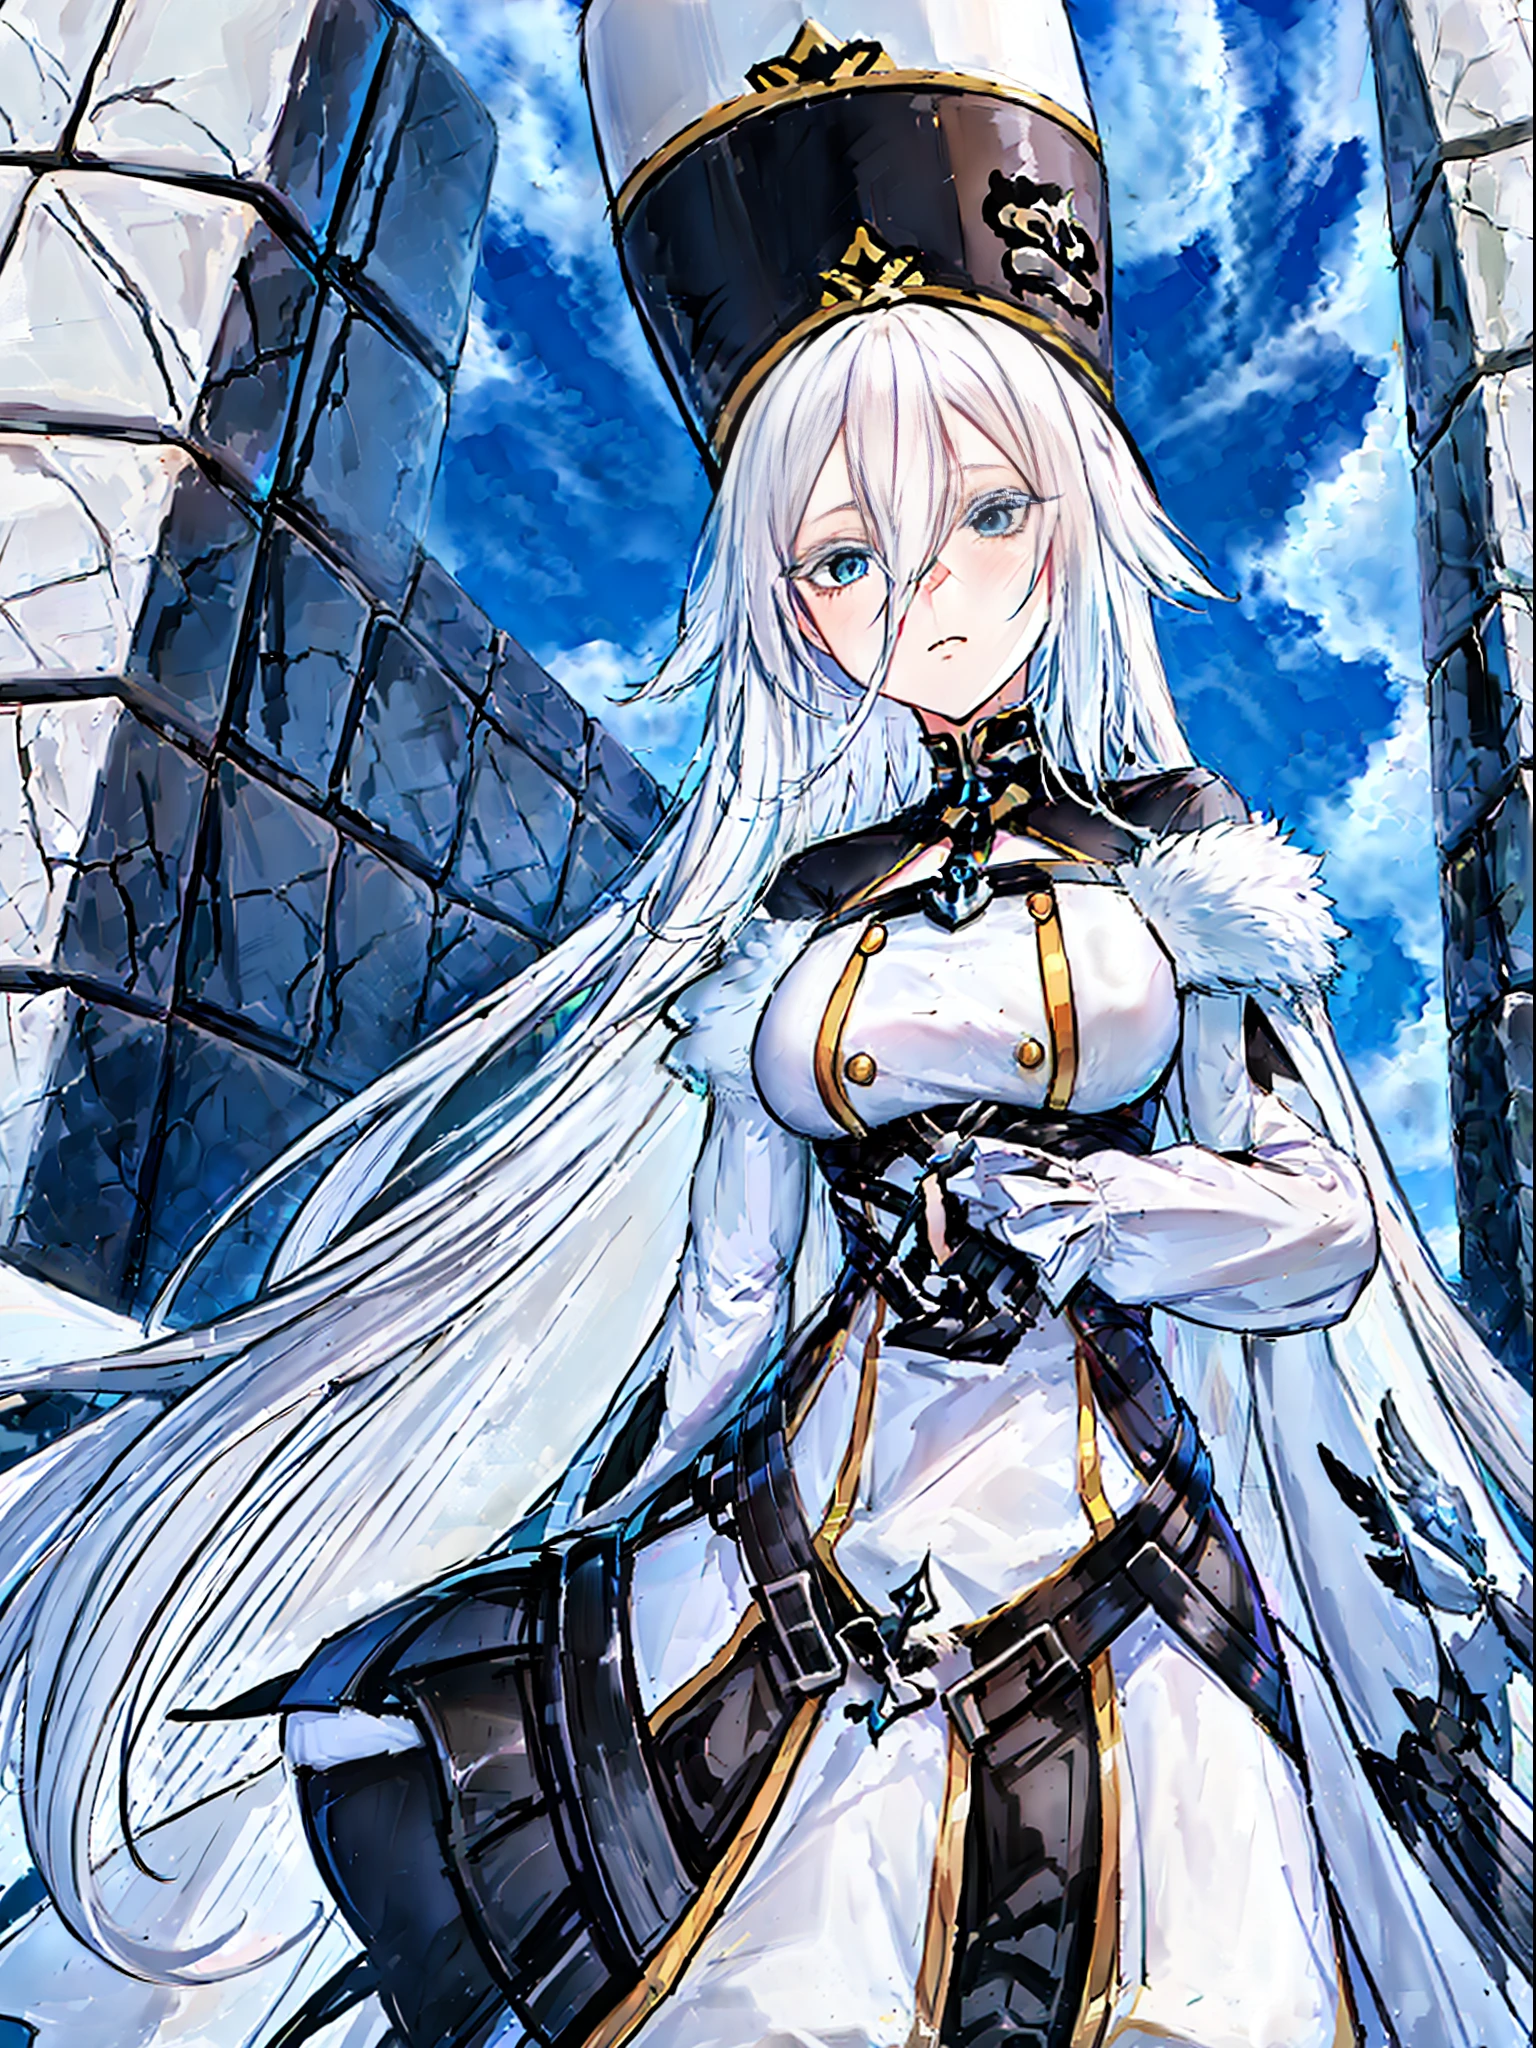 anime character with long white hair and blue eyes standing in front of a brick wall, anime visual of a cute girl, ayaka genshin impact, anime visual of a young woman, official art, aqua from konosuba, female anime character, today's featured anime still, hajime yatate, popular isekai anime, best anime character design